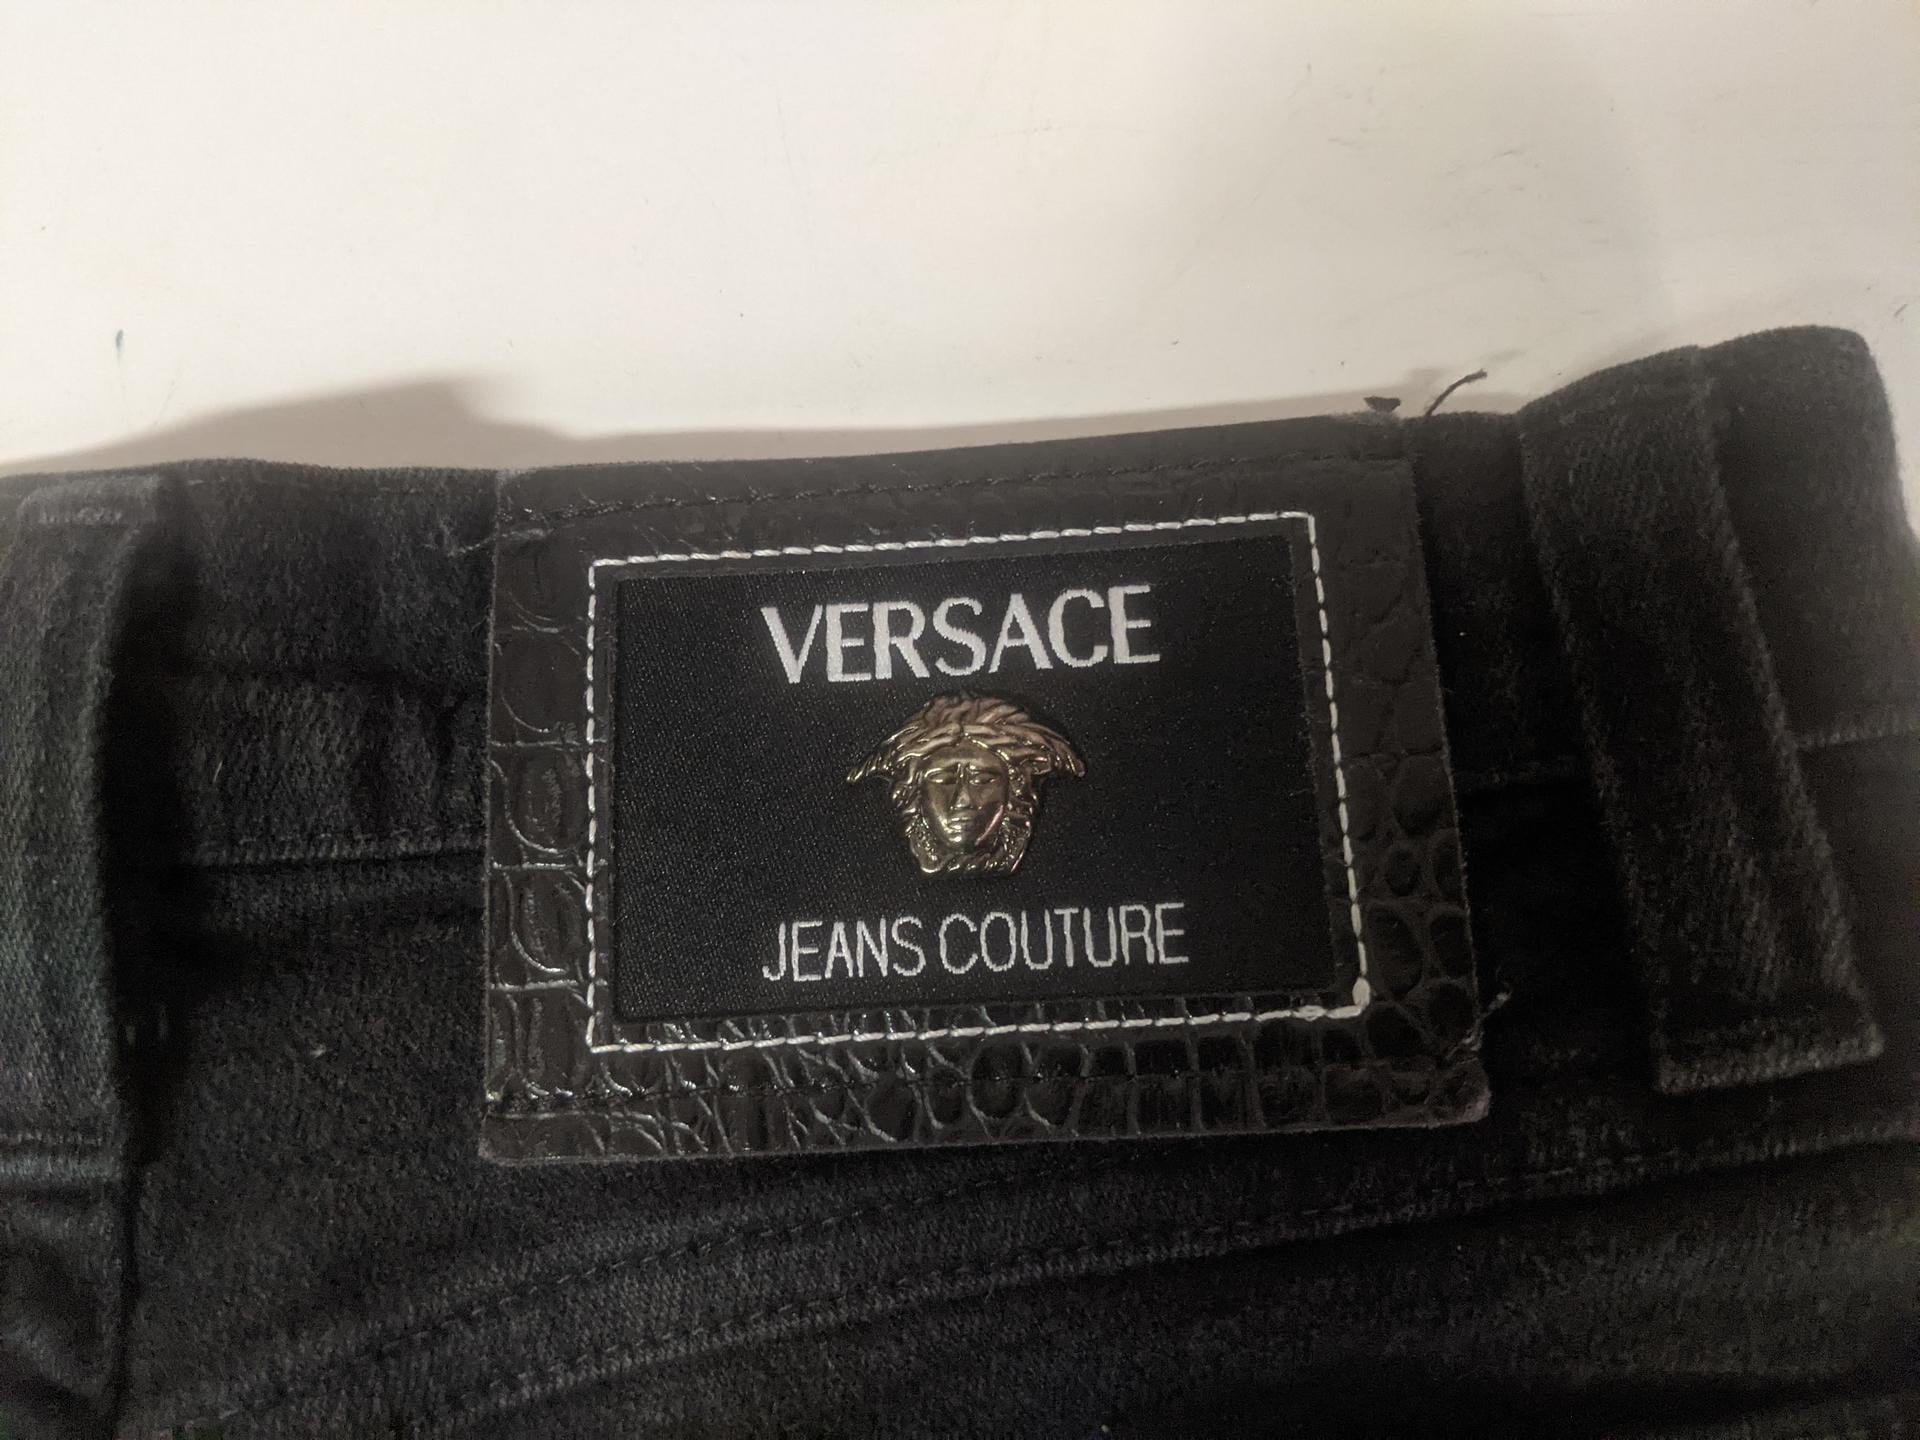 Ittierre Spa Versace Jeans Couture | peacecommission.kdsg.gov.ng